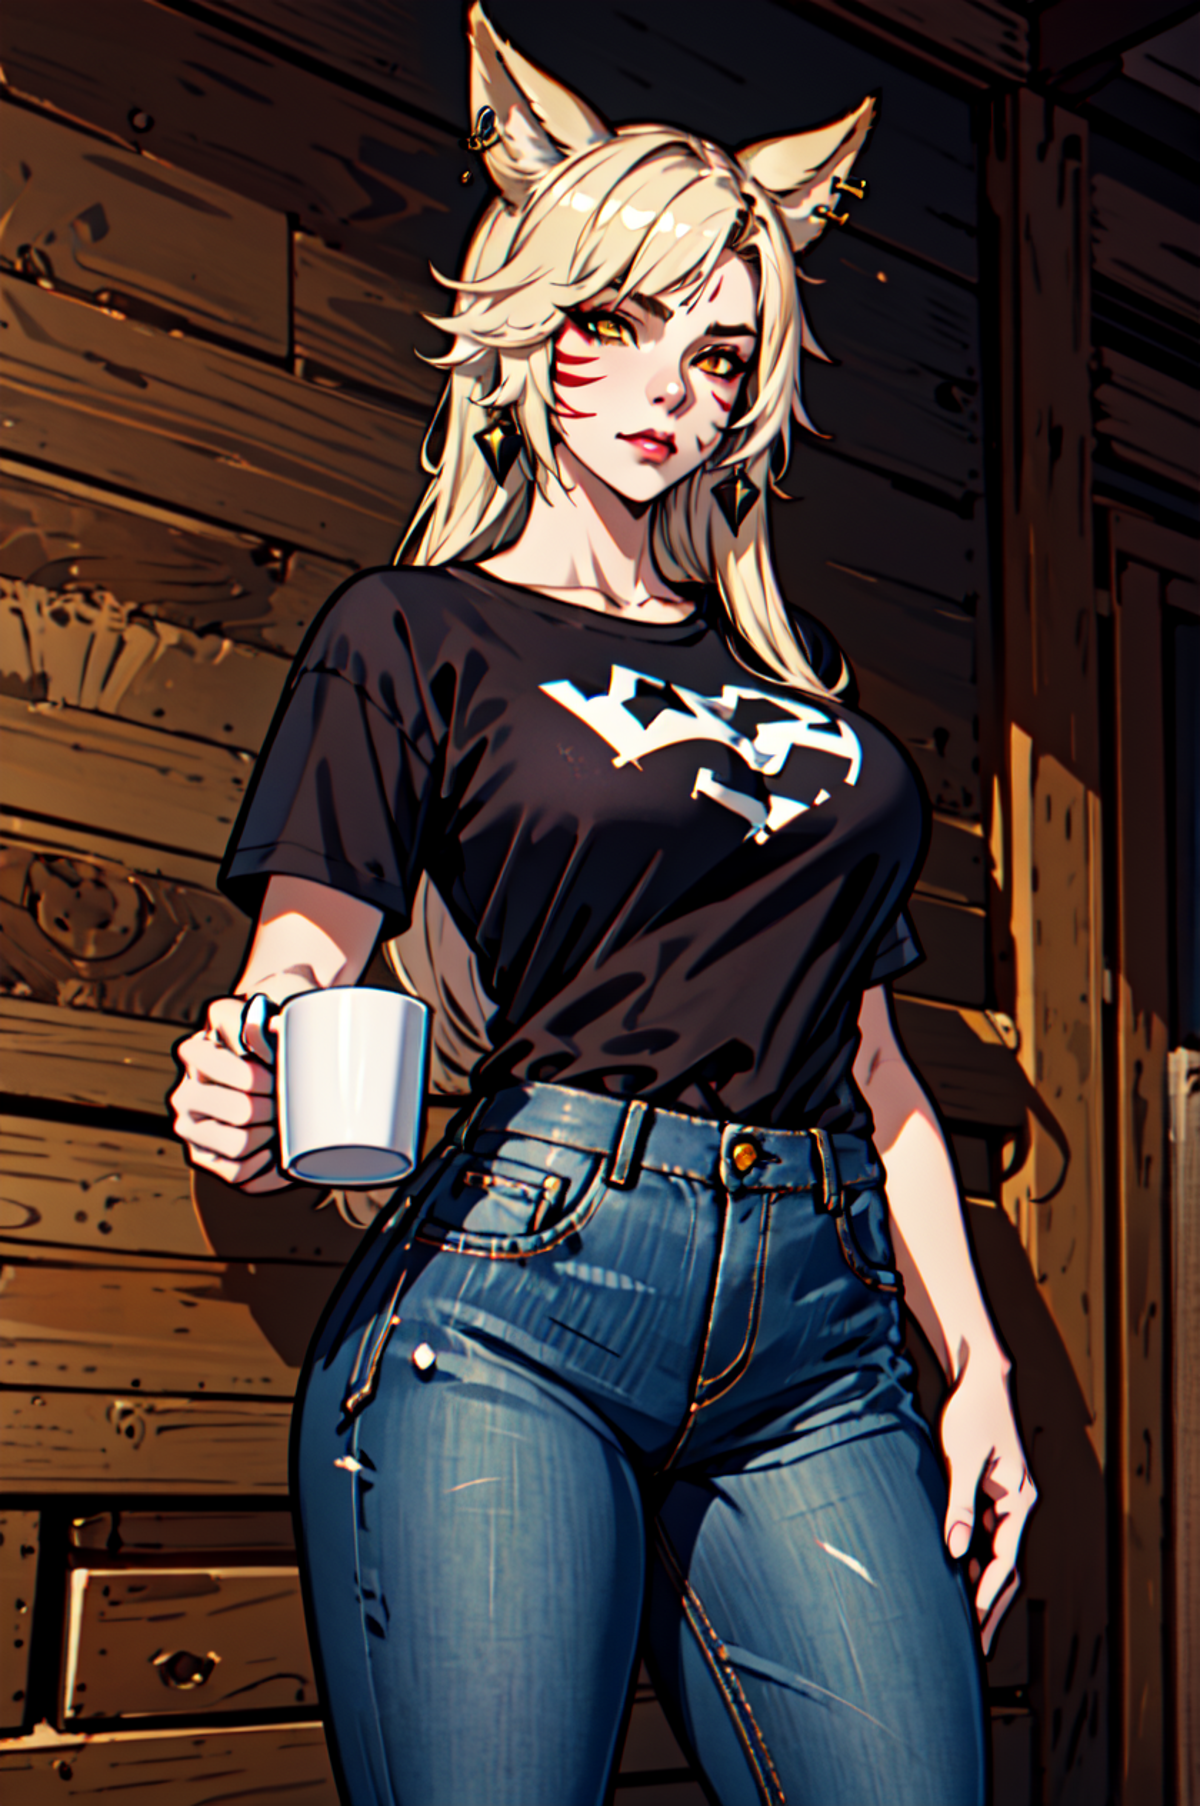 1 girl, solo, large breasts, HoldingACupofCoffee,tshirt, jeans,  Simple-Miqote